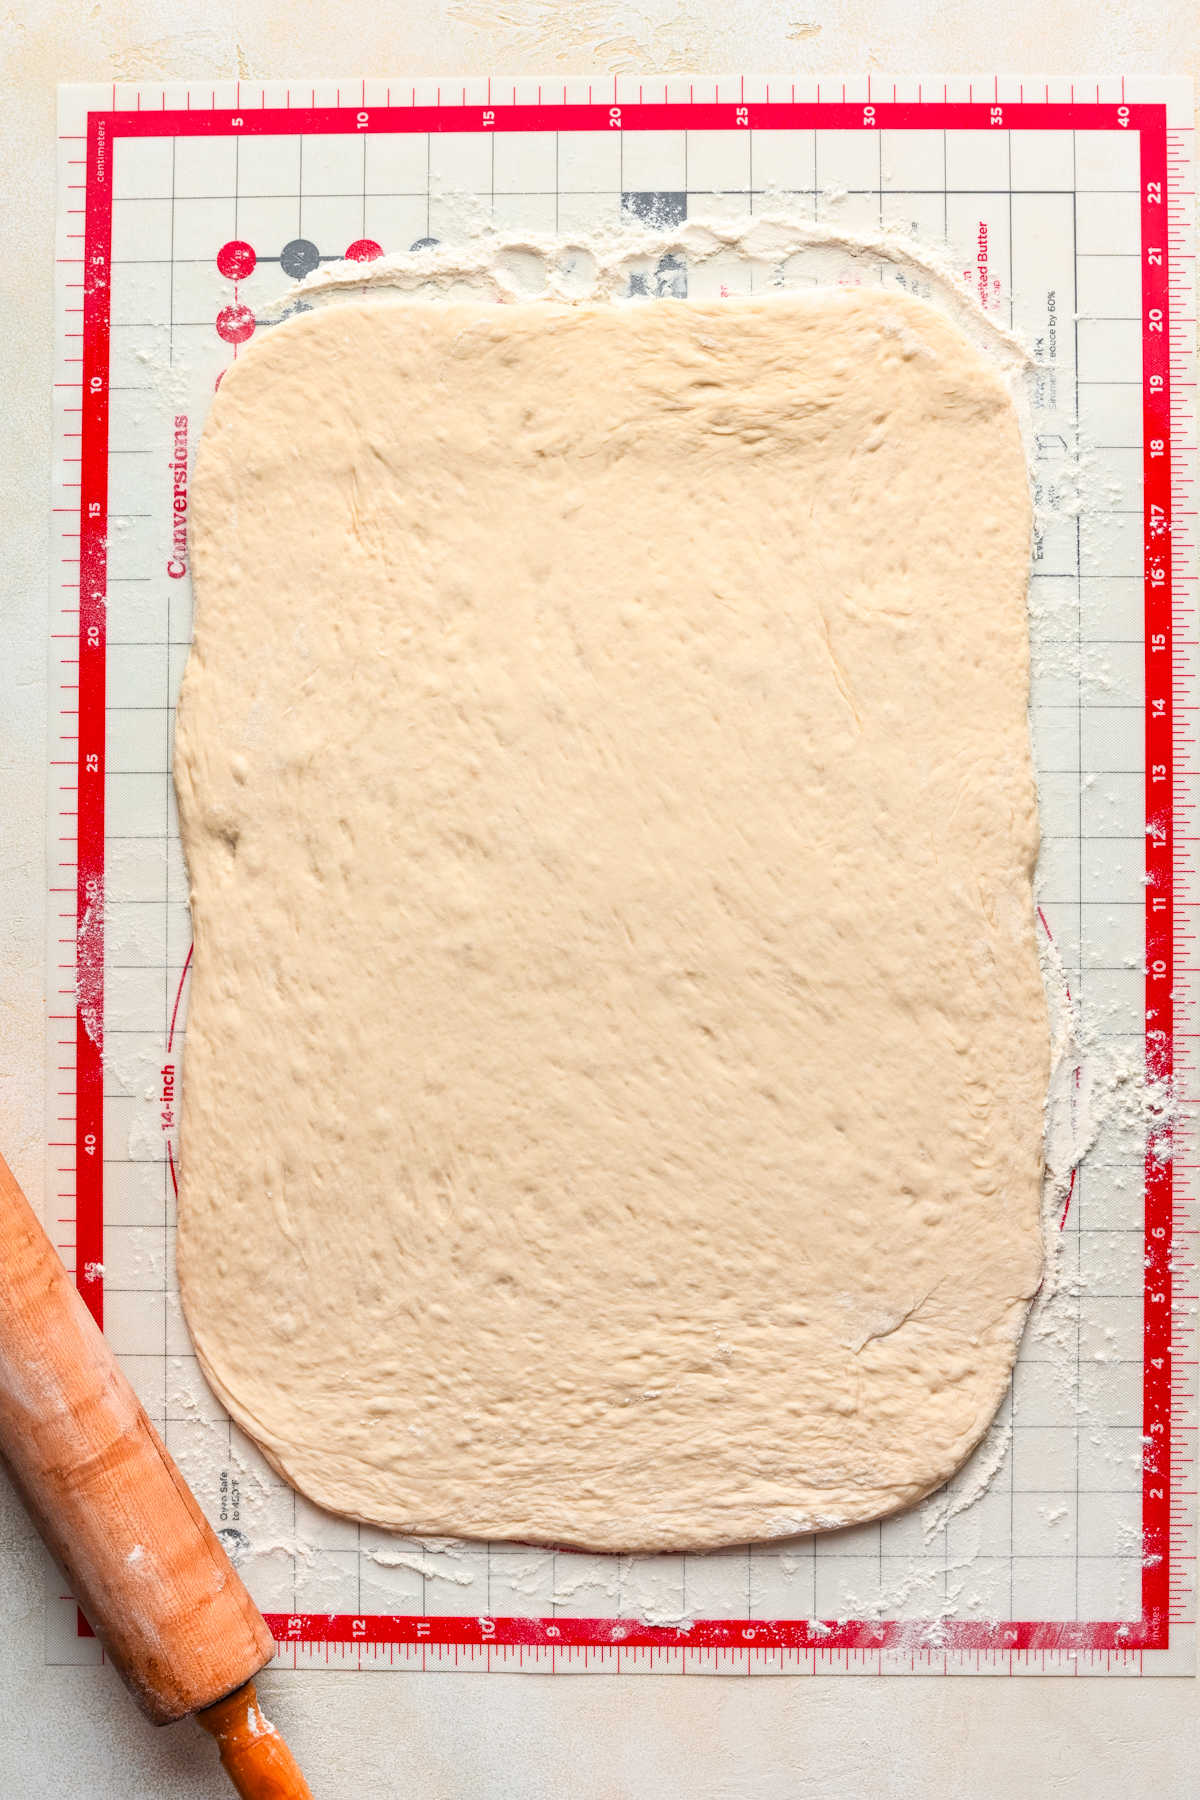 Rolled out breadstick dough on a silicone baking mat.